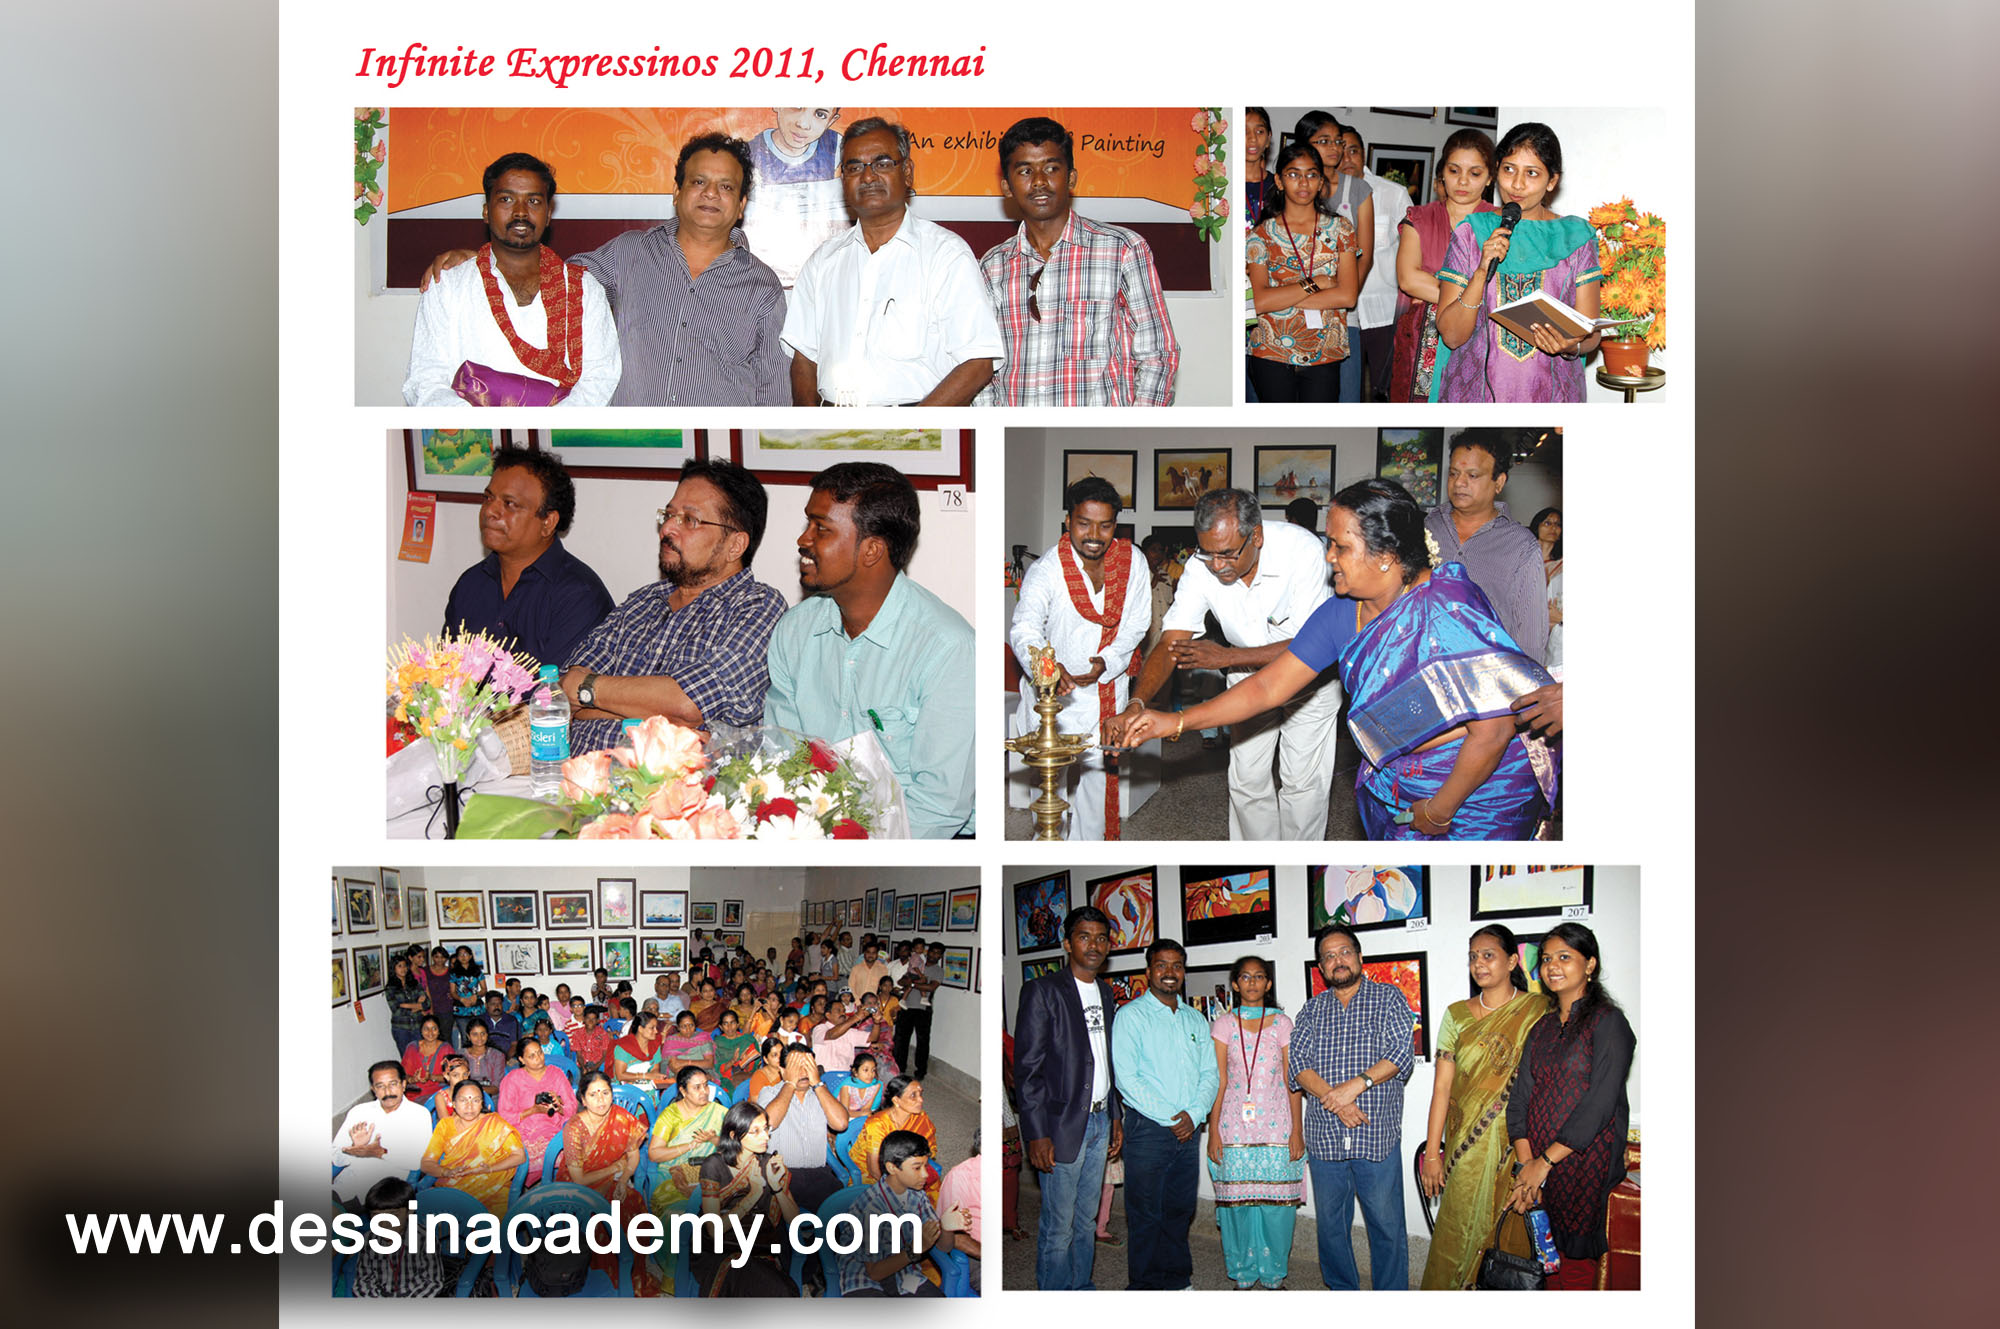 Dessin School of Arts Event Gallery 5, Drawing classes in ThirumullaivoyalSai Ram Academy